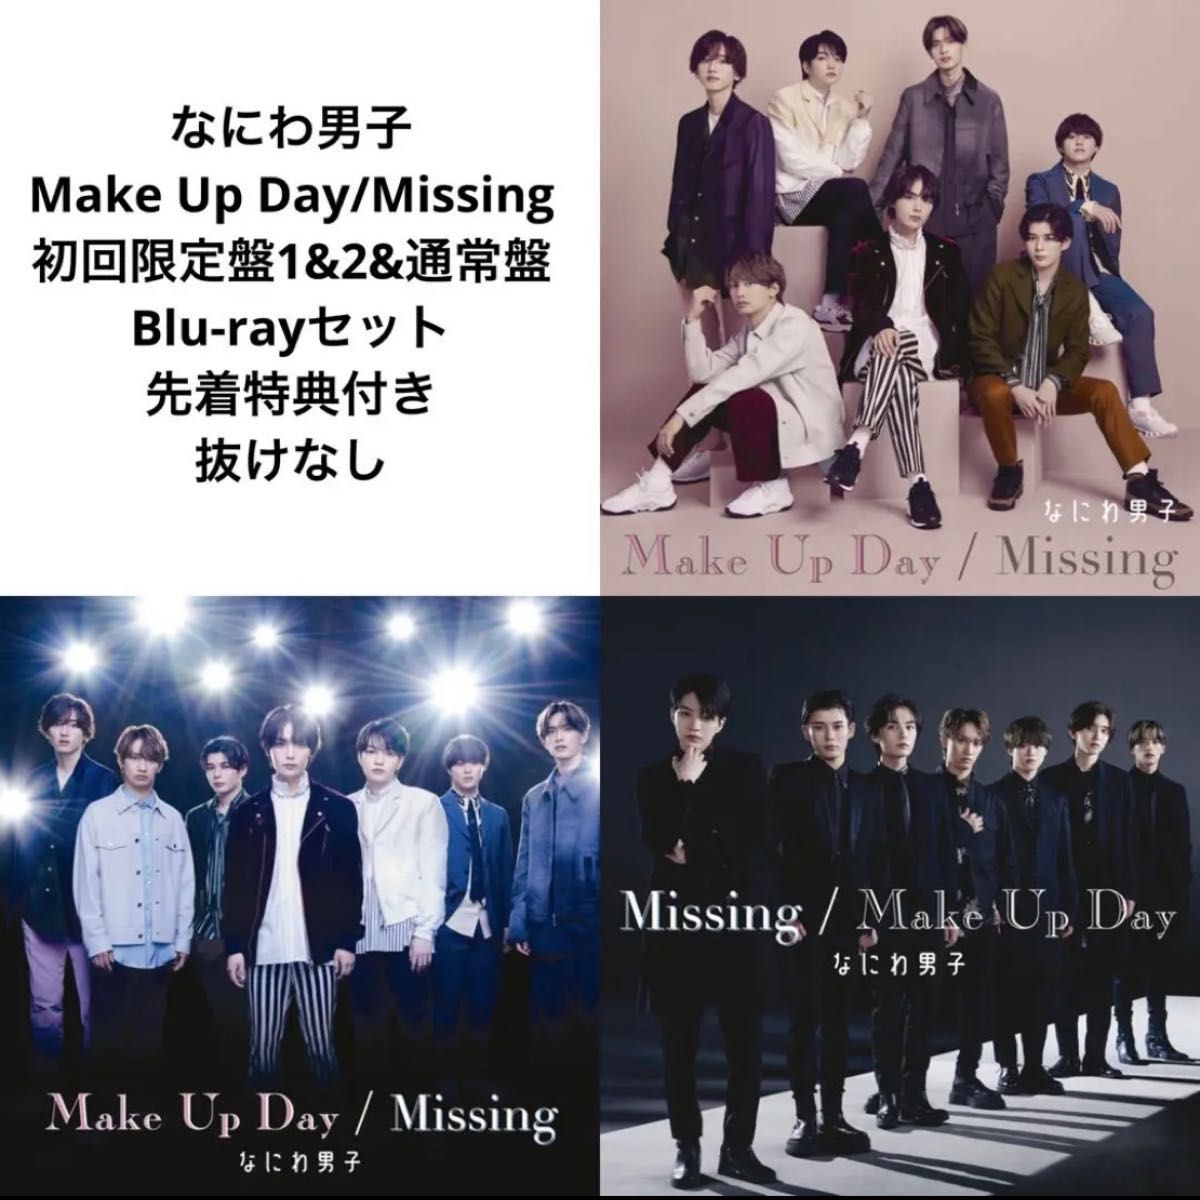 Make Up Day Missing 即購入不可 - 邦楽